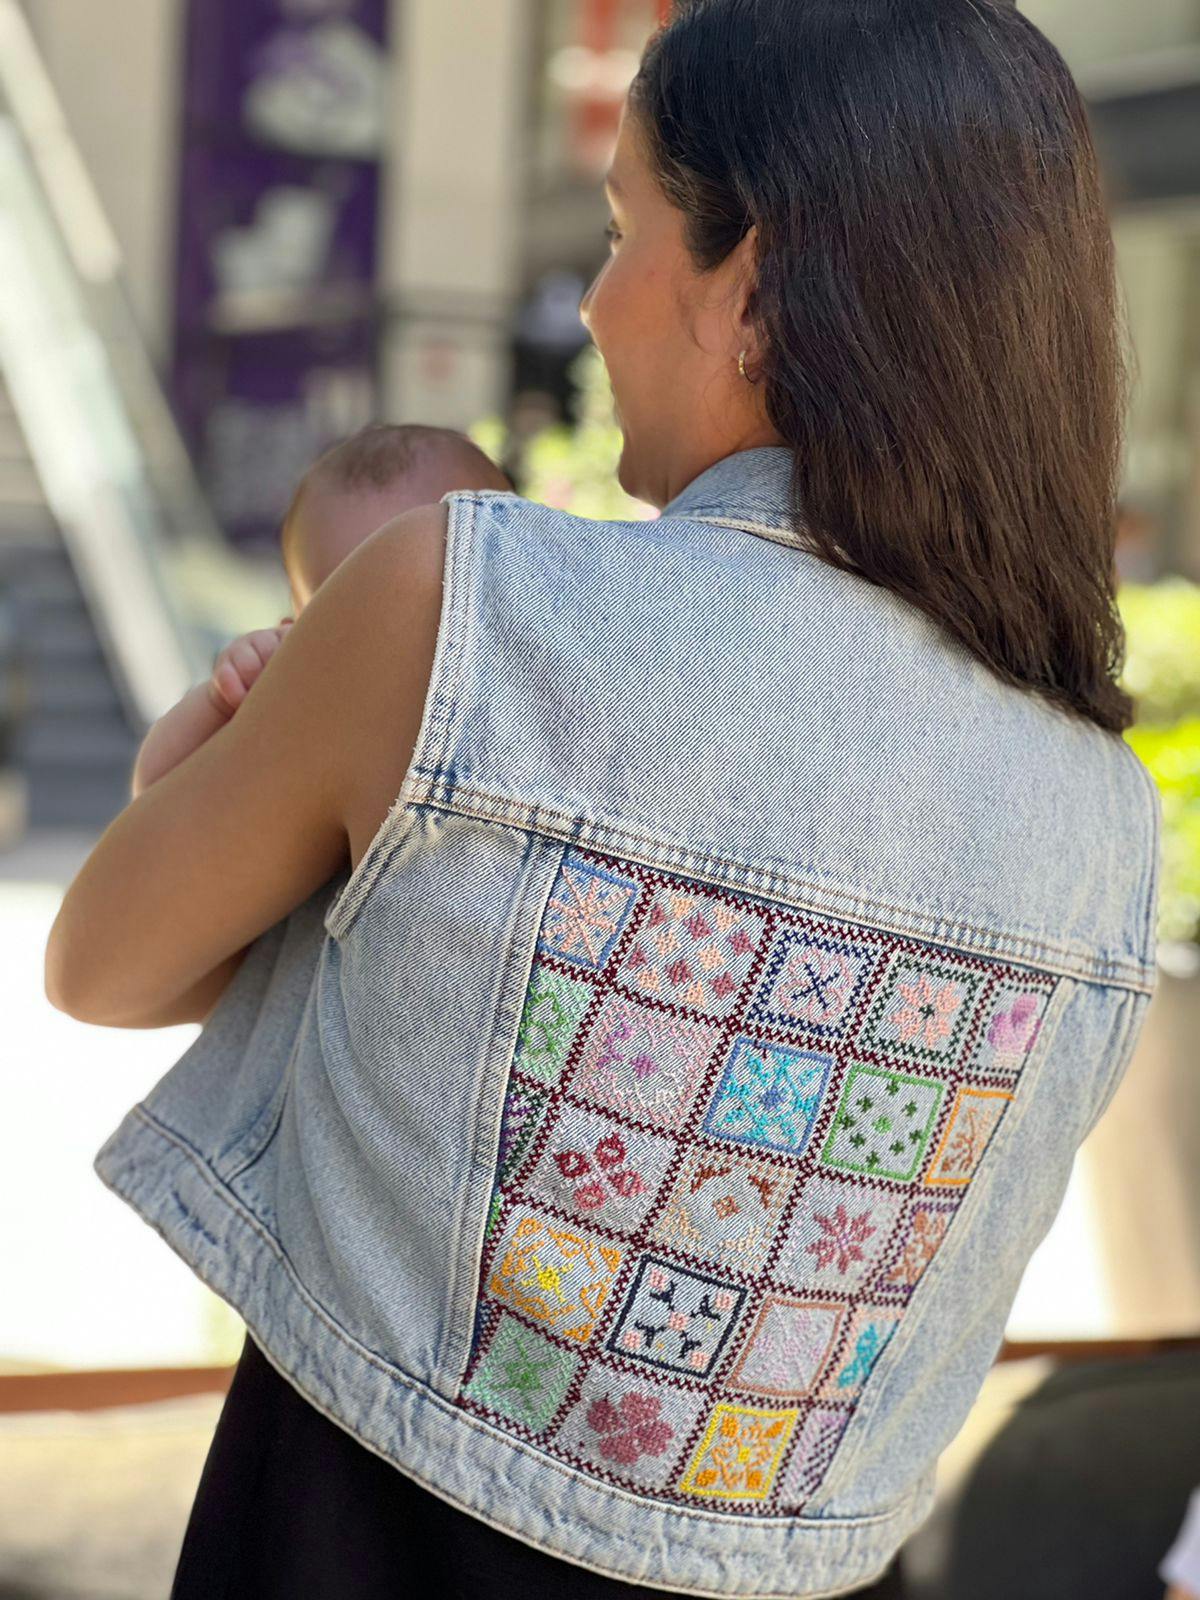 Arabesque denim vest with a V-neckline. Patch pockets with flaps on the front. Metallic button fastening on the front. MATERIAL & SUSTAINABILITY  Material: 100% cotton   Hand embroidered denim vest wi